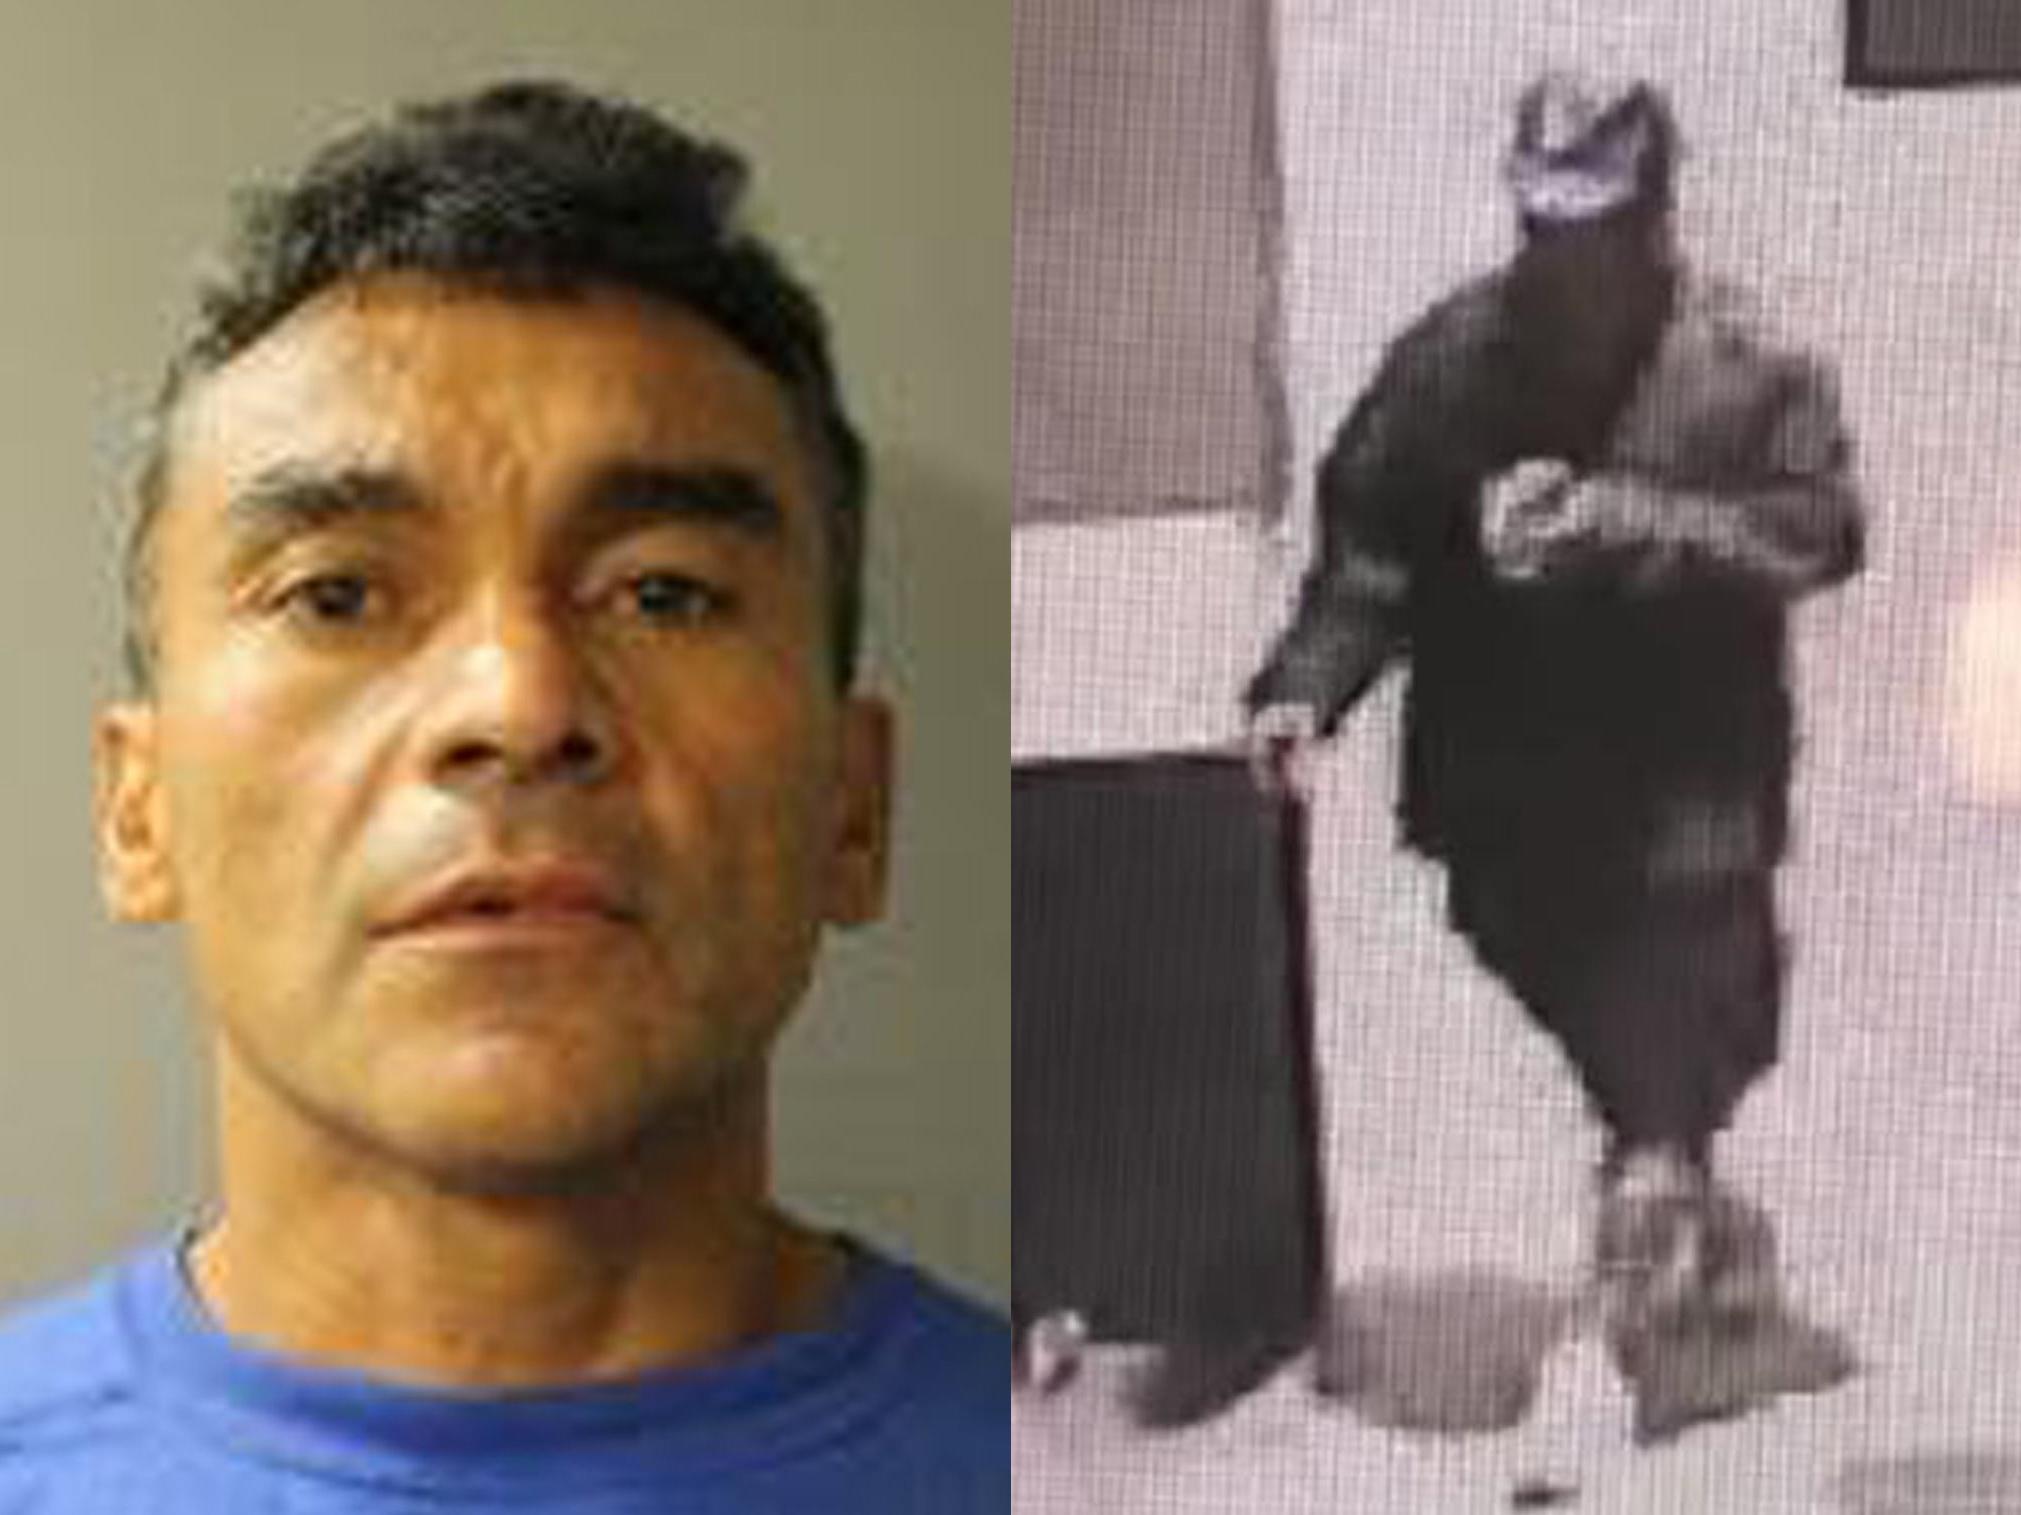 Ramon Escobar admitted killing his aunt and uncle and is also accused of attacking homeless men with baseball bats in downtown Los Angeles and Santa Monica.